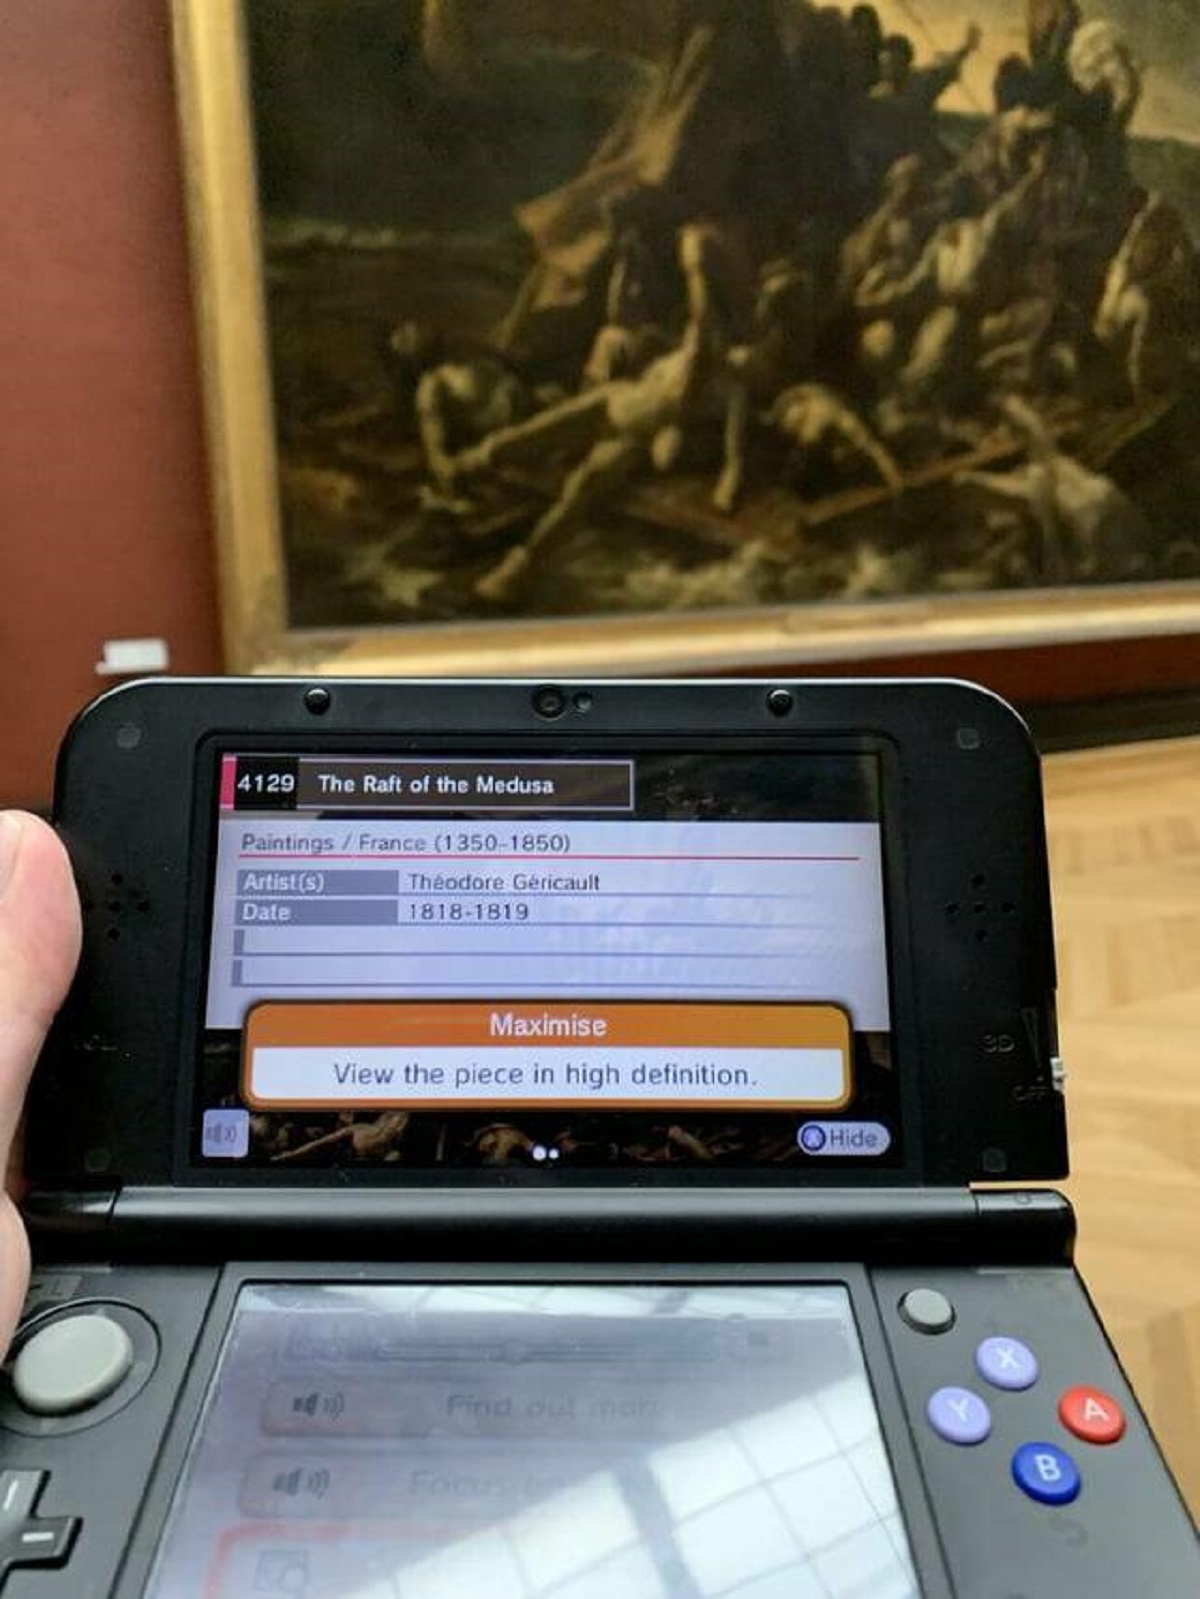 "The audio guide in the Louvre is a Nintendo 3DS"